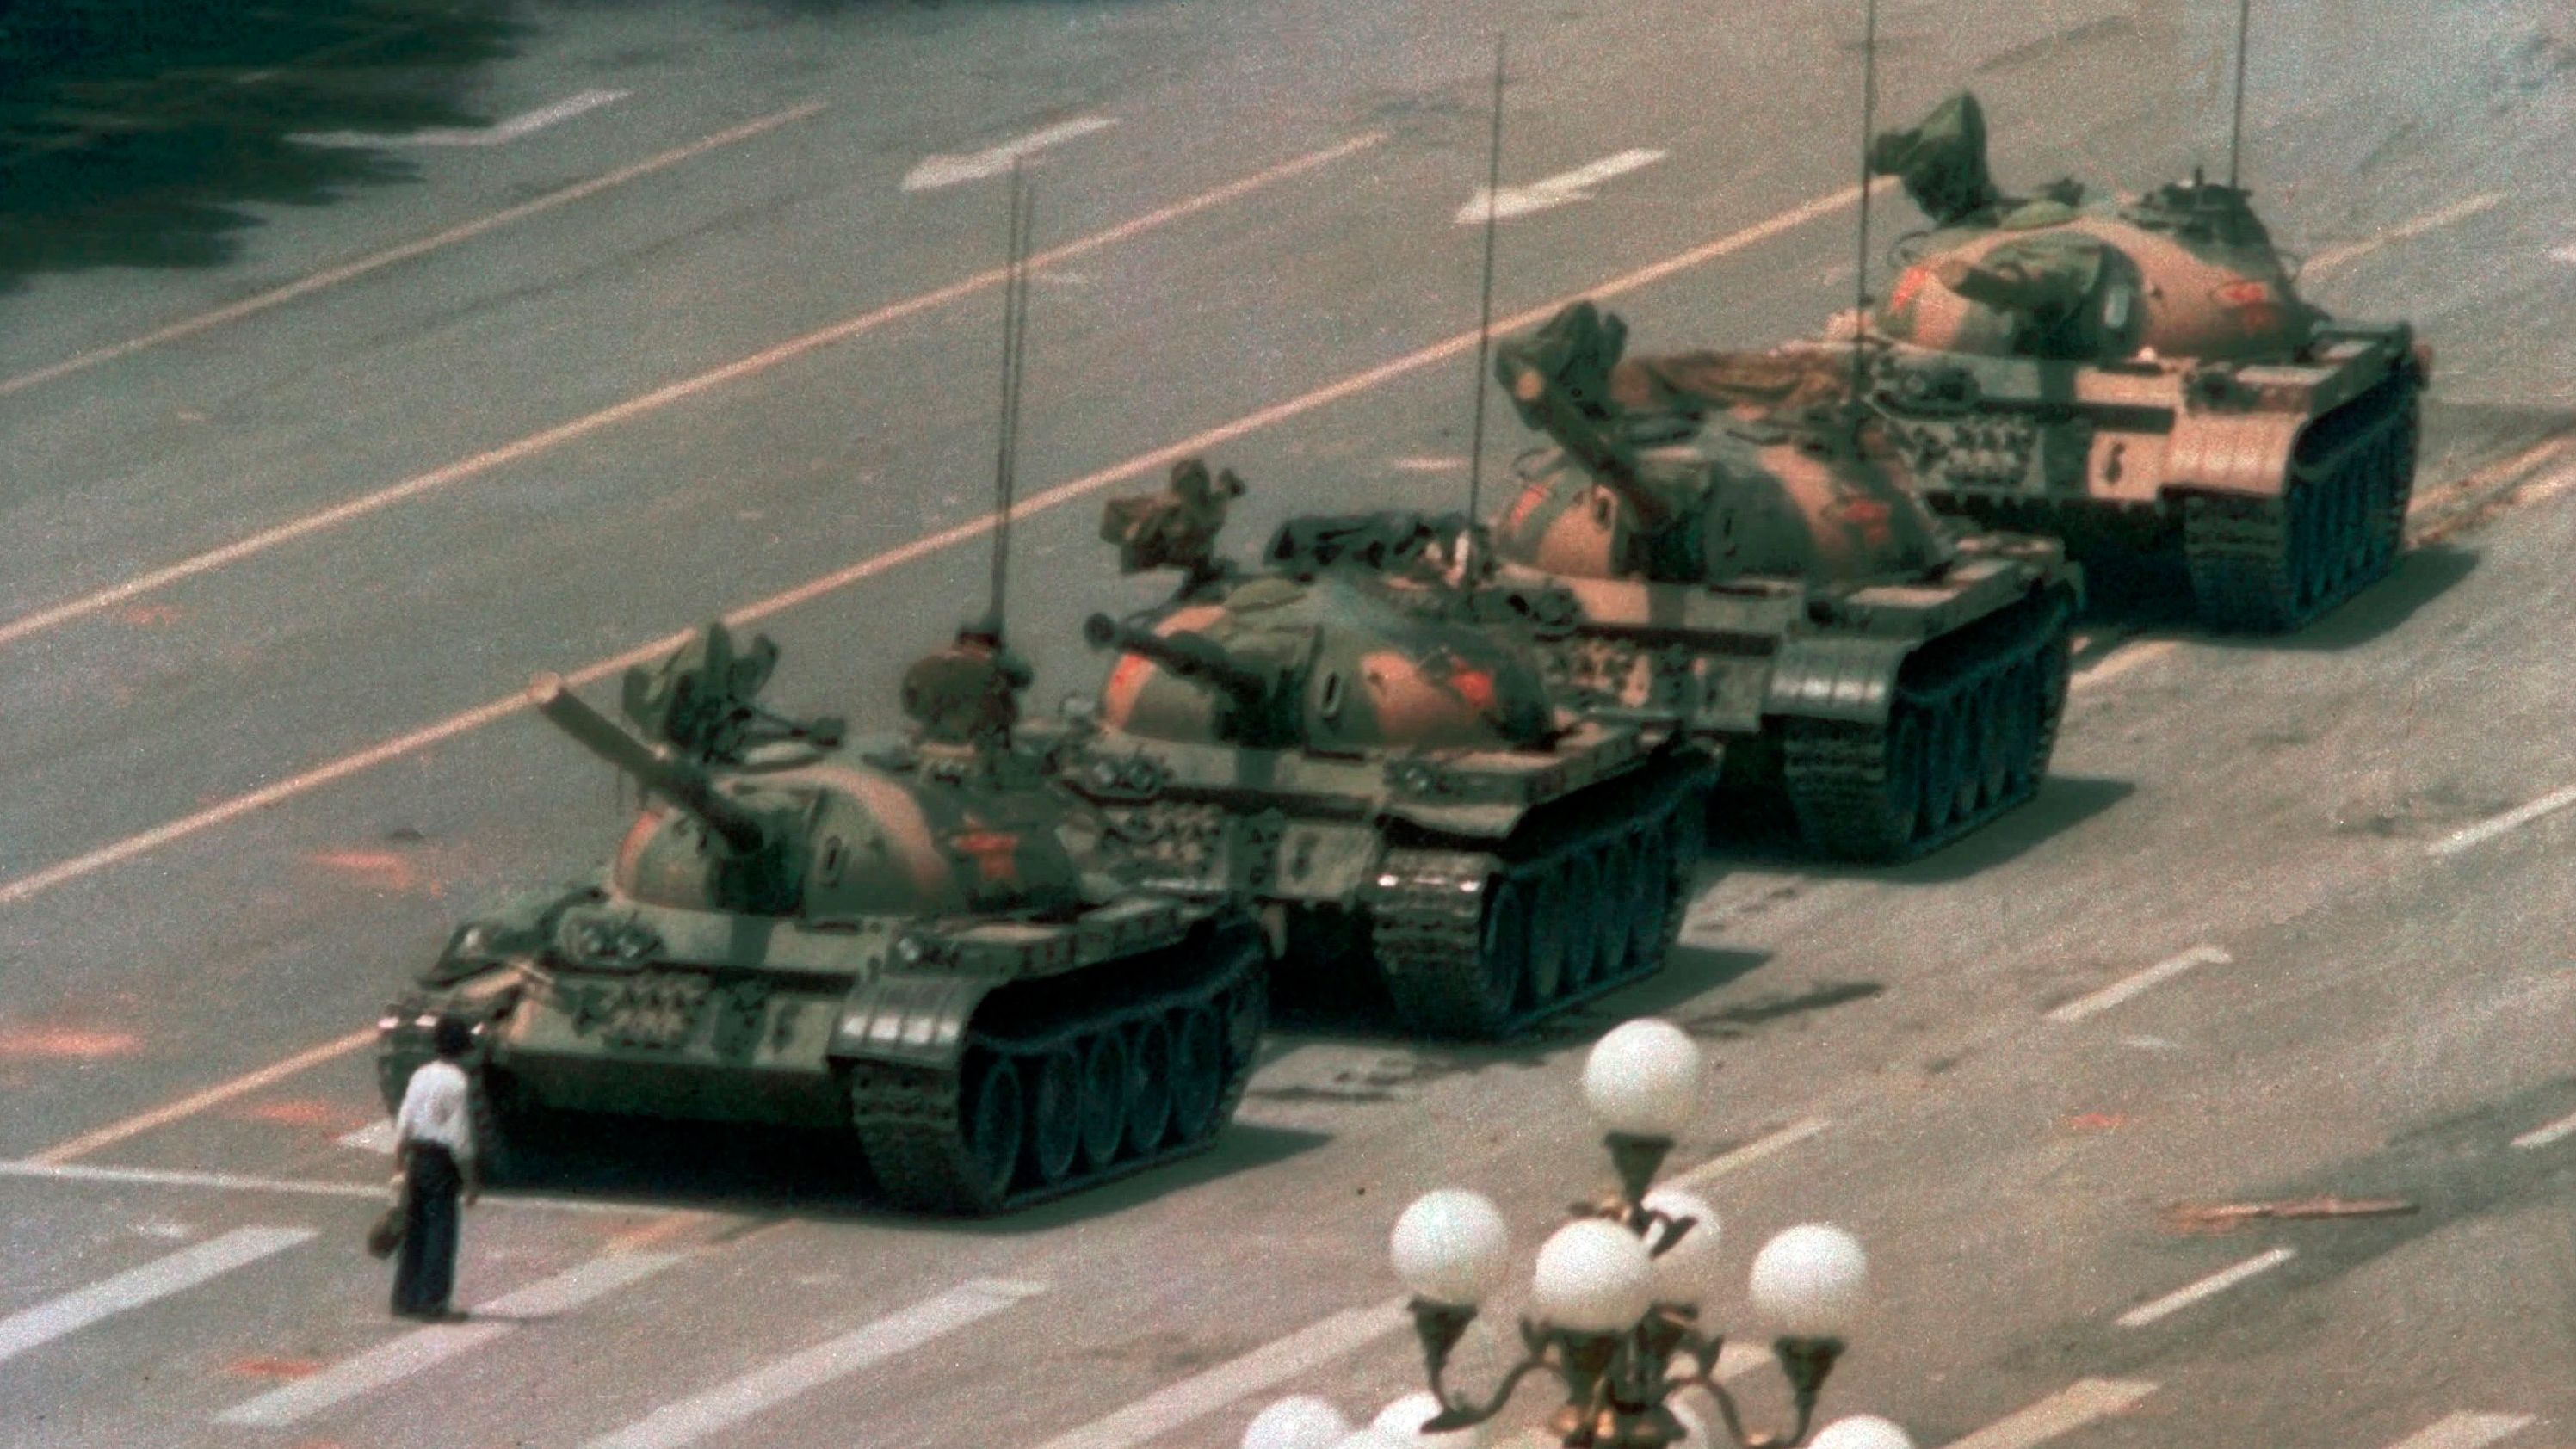 A Chinese man <a href="https://www.cnn.com/interactive/2019/05/world/tiananmen-square-tank-man-cnnphotos/" target="_blank">stands in front of a line of tanks</a> during a standoff in Beijing's Tiananmen Square on June 5, 1989. It was a day after Chinese troops began violently cracking down on pro-democracy demonstrators who had been in the square for over a month. The lead tank stopped and tried to go around the man. The man moved with the tank, blocking its path once again. At one point, the man climbed aboard the lead tank and appeared to speak to whoever was inside. The man was eventually pulled away by onlookers. To this day, we don't know who he is and what happened to him. But he remains a powerful symbol of defiance.